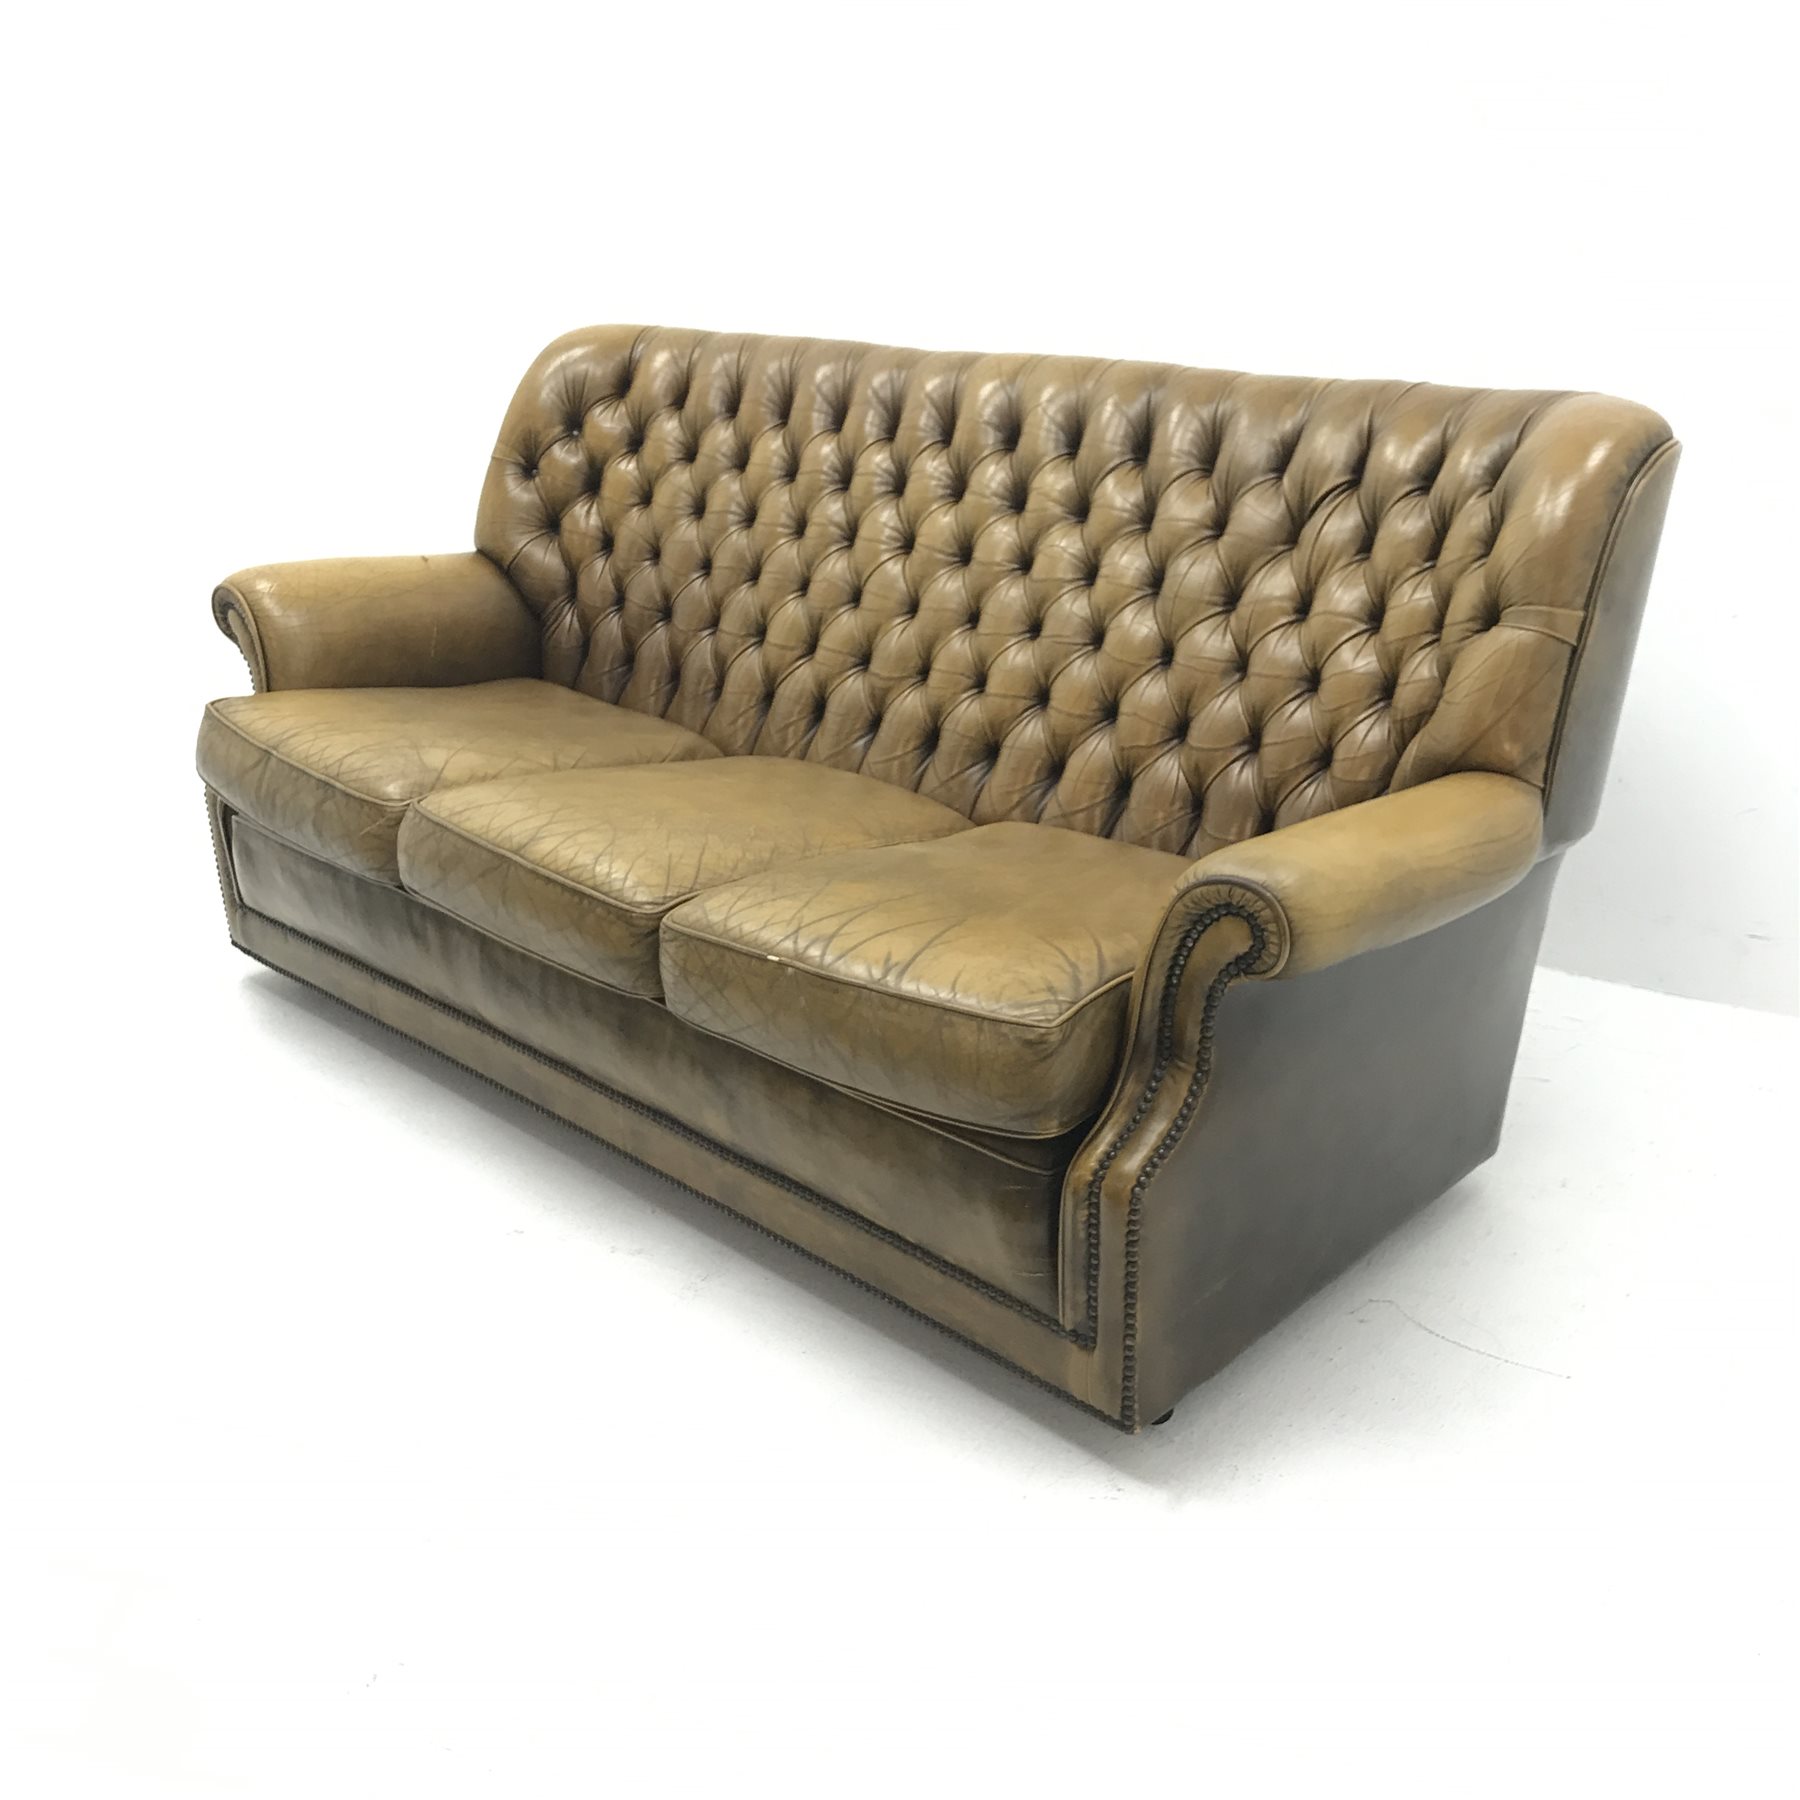 Pegasus three seat sofa upholstered in deeply buttoned antique brown leather, W185cm - Image 4 of 12